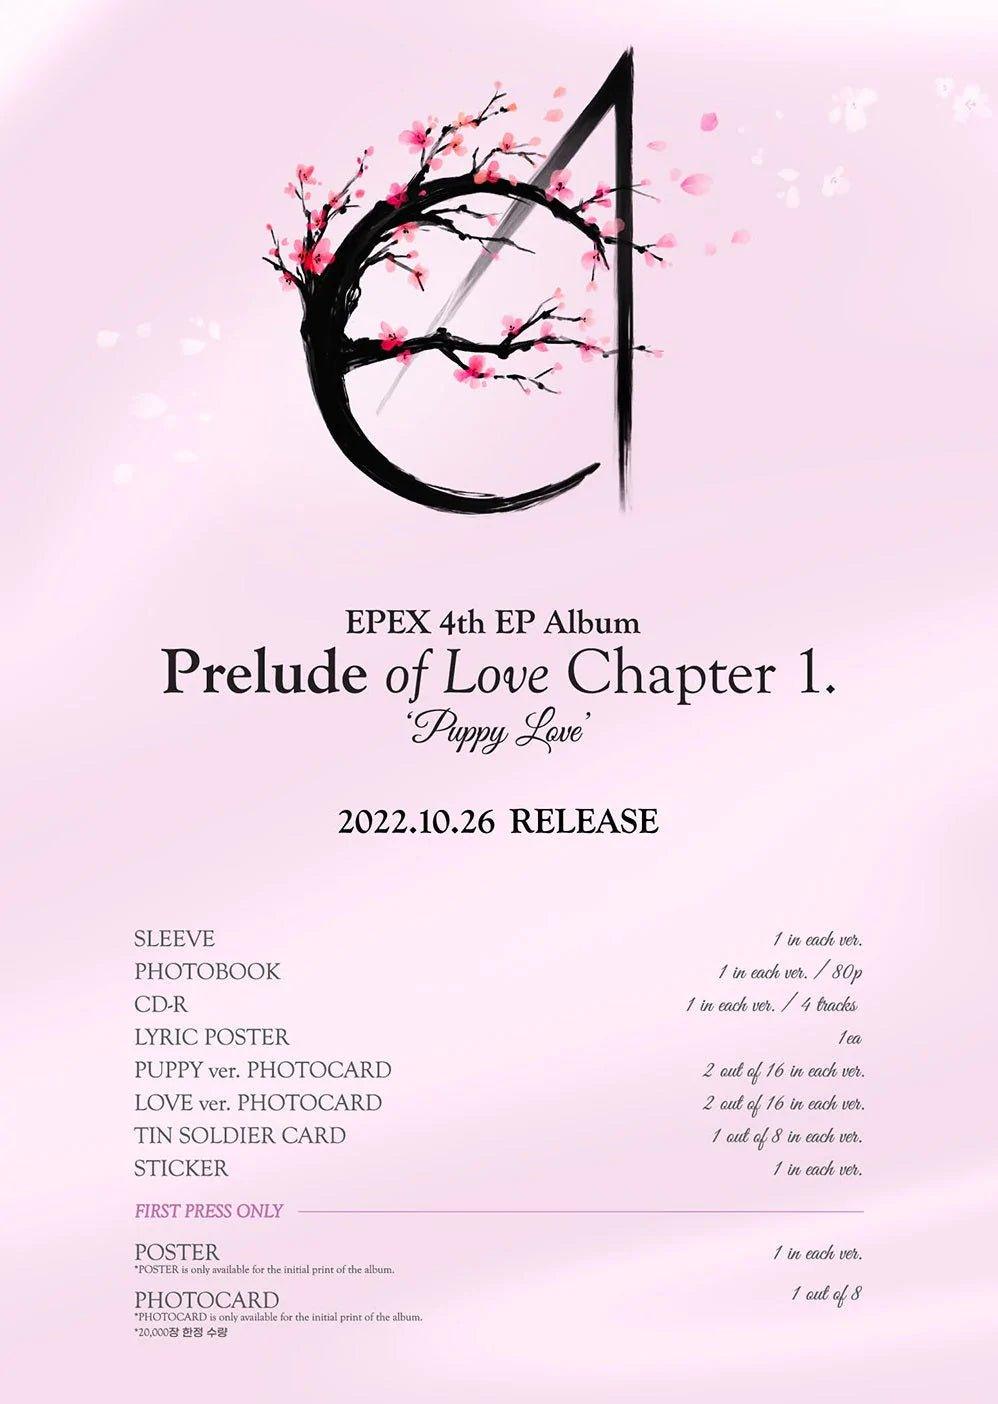 (SOBREPEDIDO) EPEX - PUPPY LOVE PRELUDE OF LOVE CHAPTER 1 4TH EP ALBUM - K-POP WORLD (6811997175943)